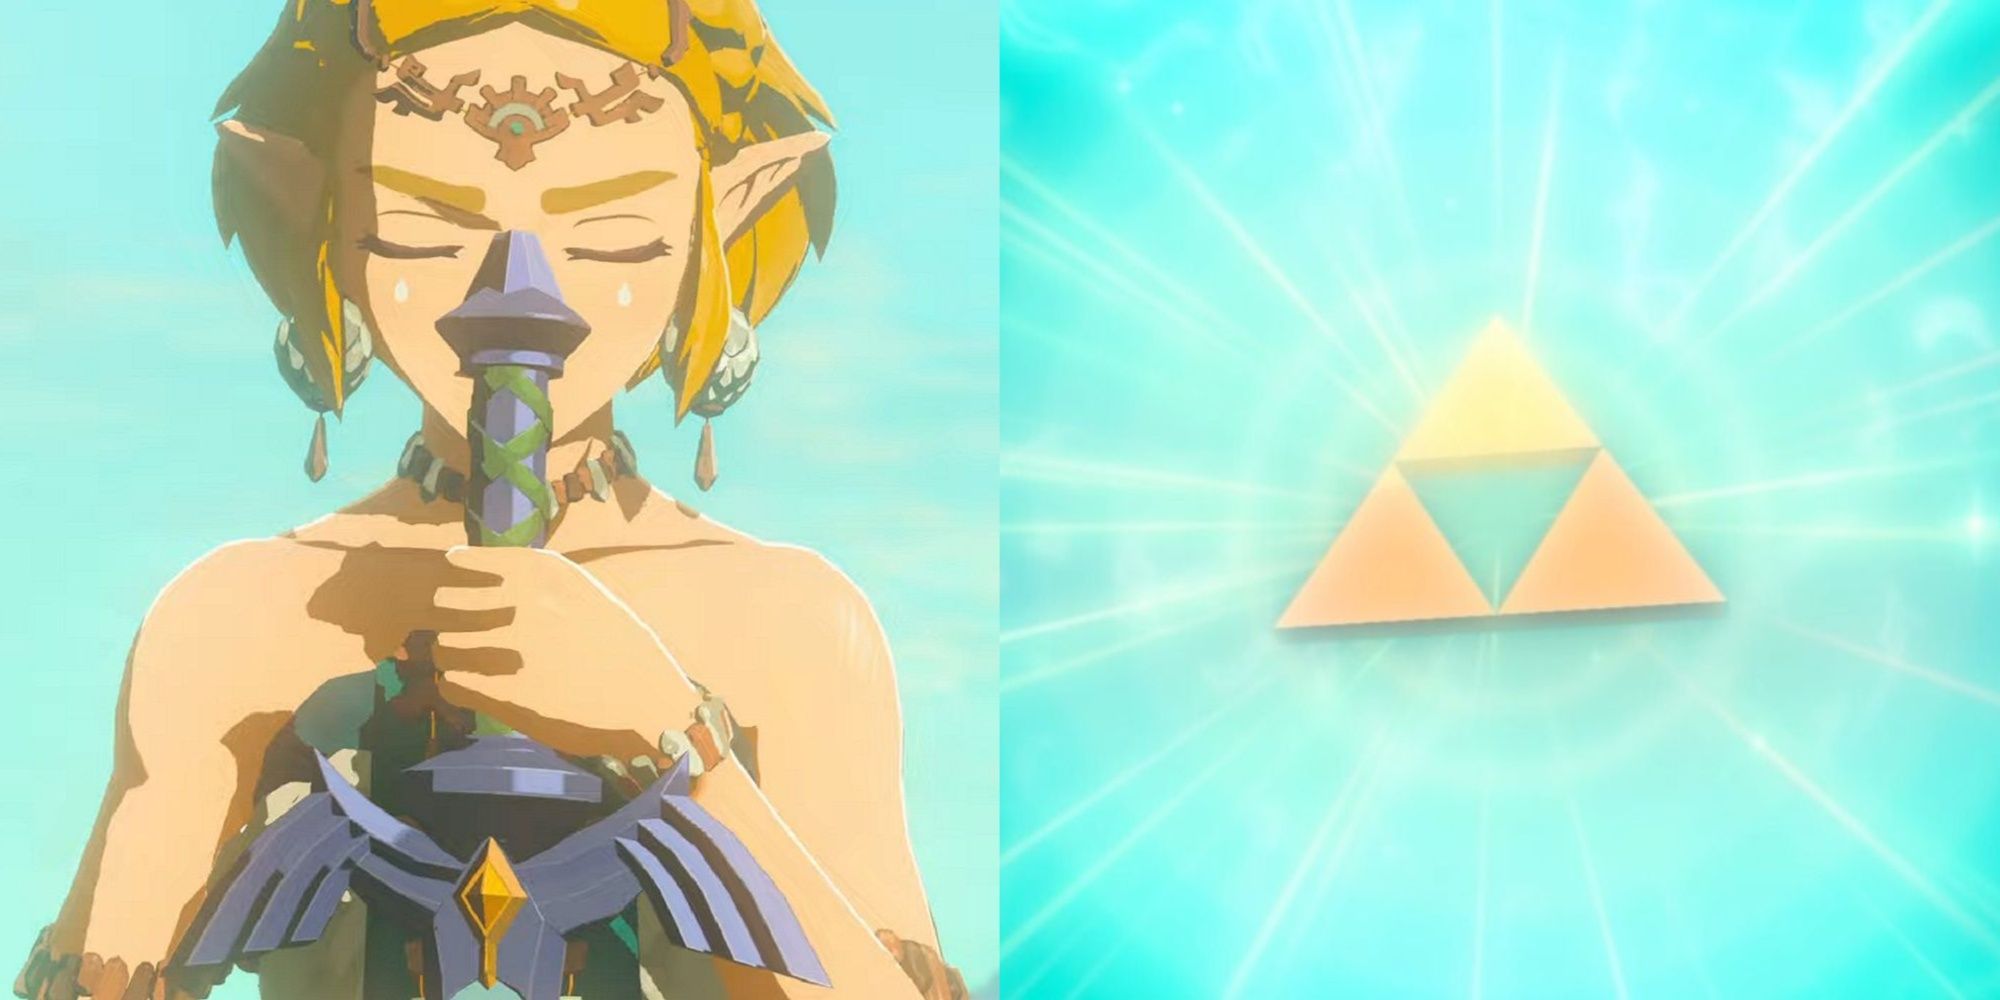 The Legend Of Zelda: Ocarina Of Time hailed as 'immortal